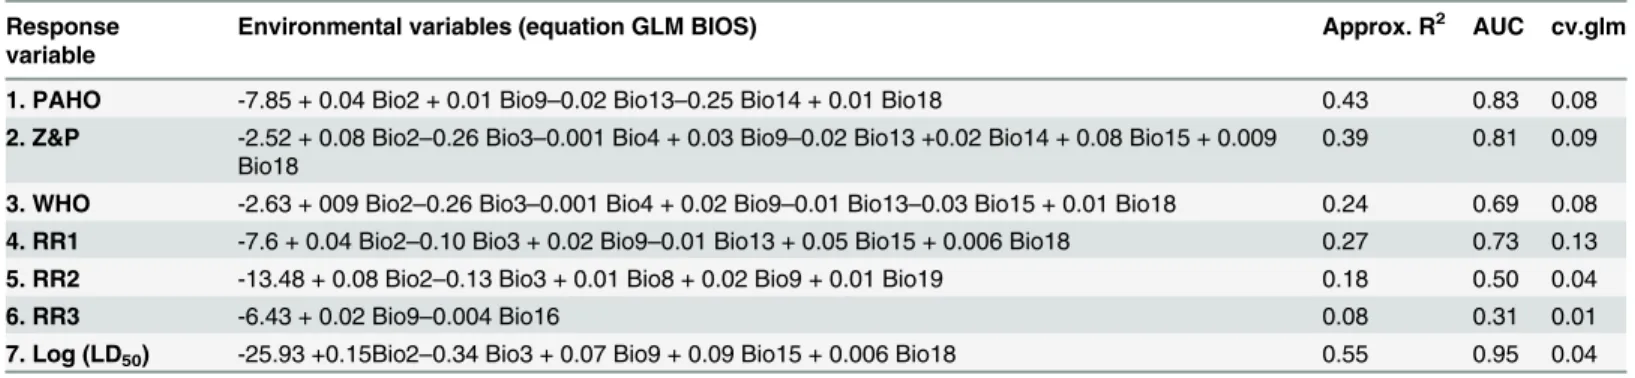 Table 2. Best GLM models for each response variable as a function of bioclimatic variables (Bioxx)